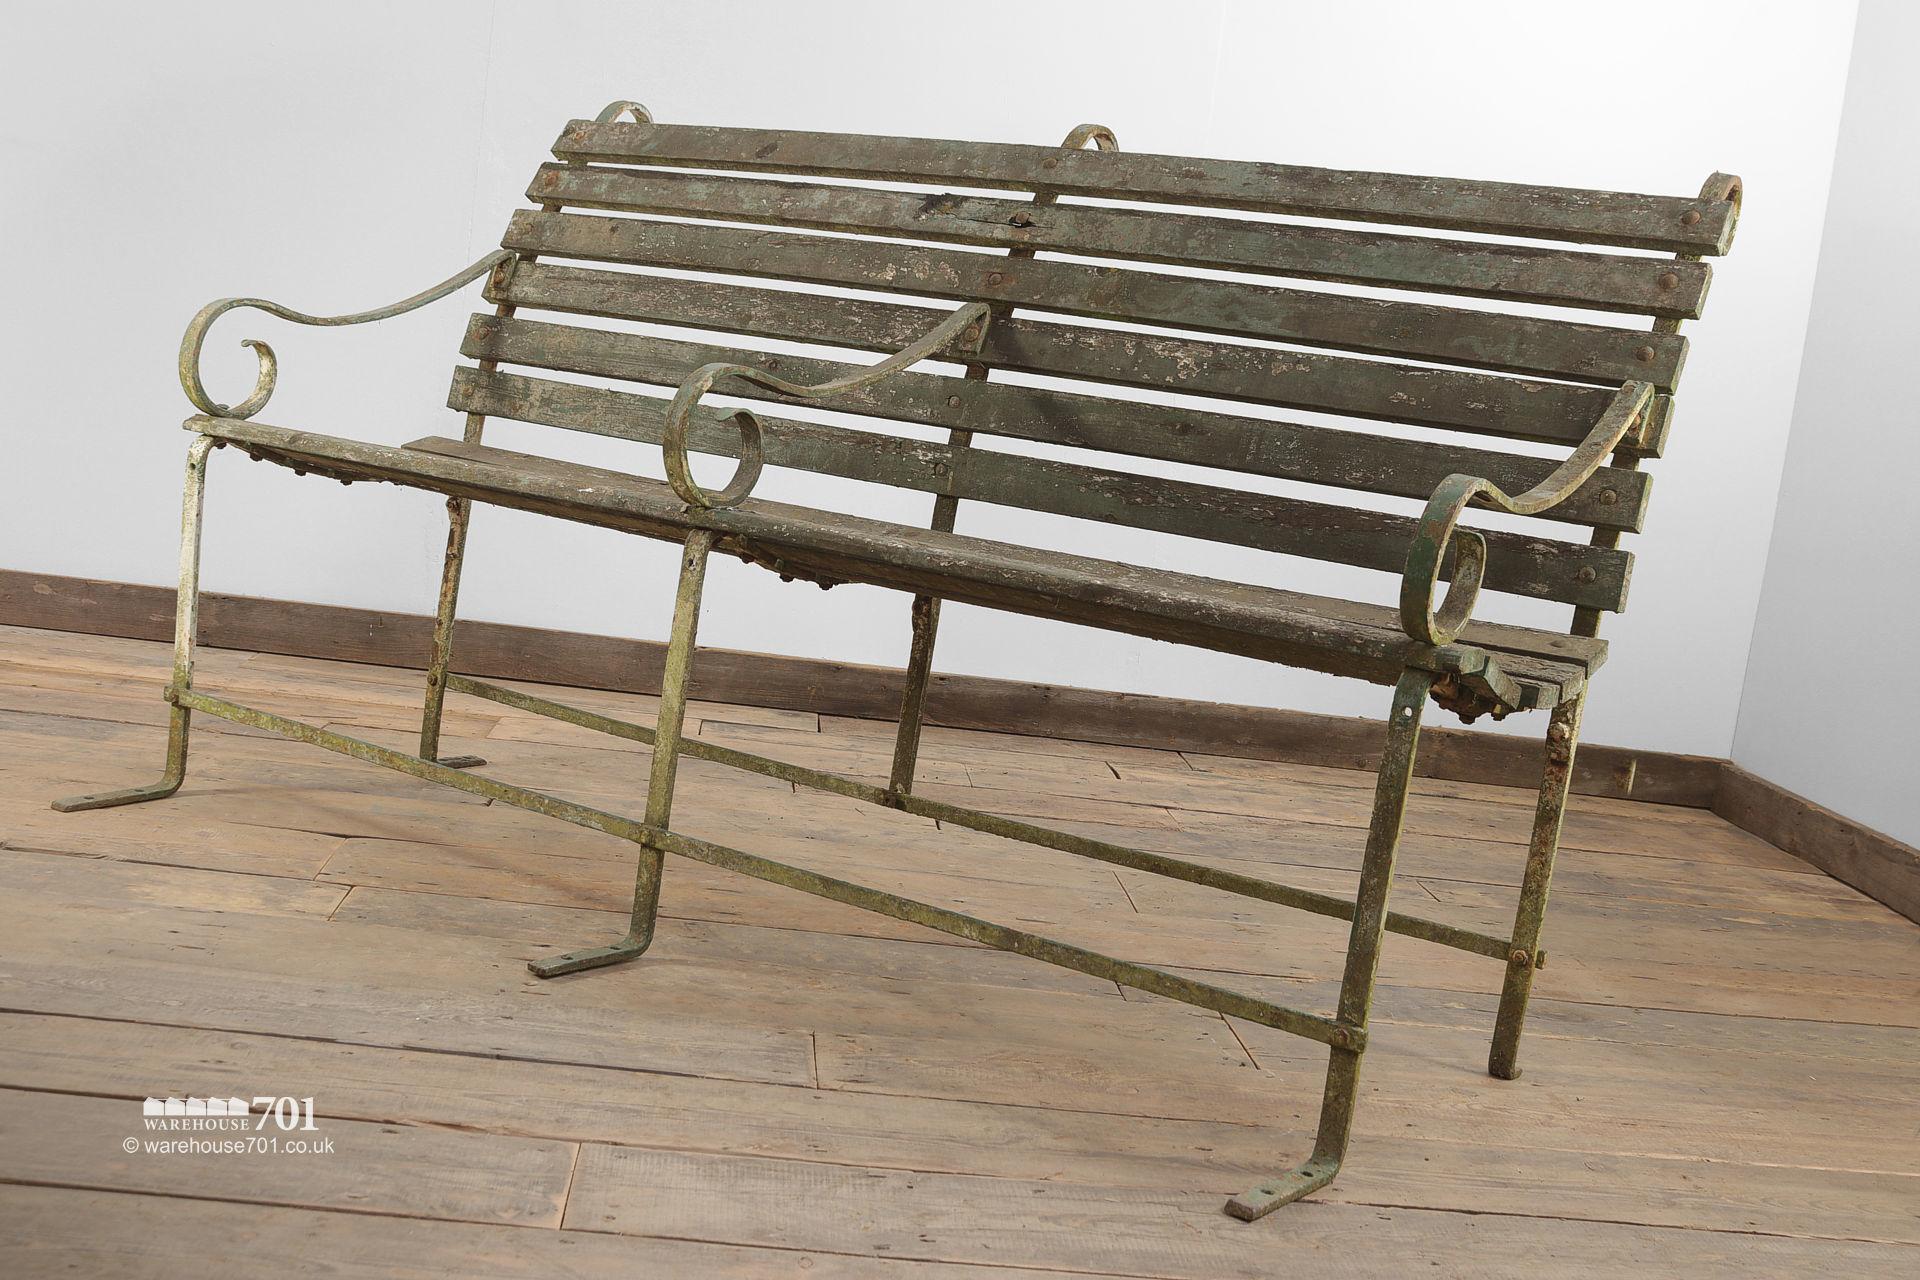 Vintage Bus or Tram Station Wrought Iron Bench #4